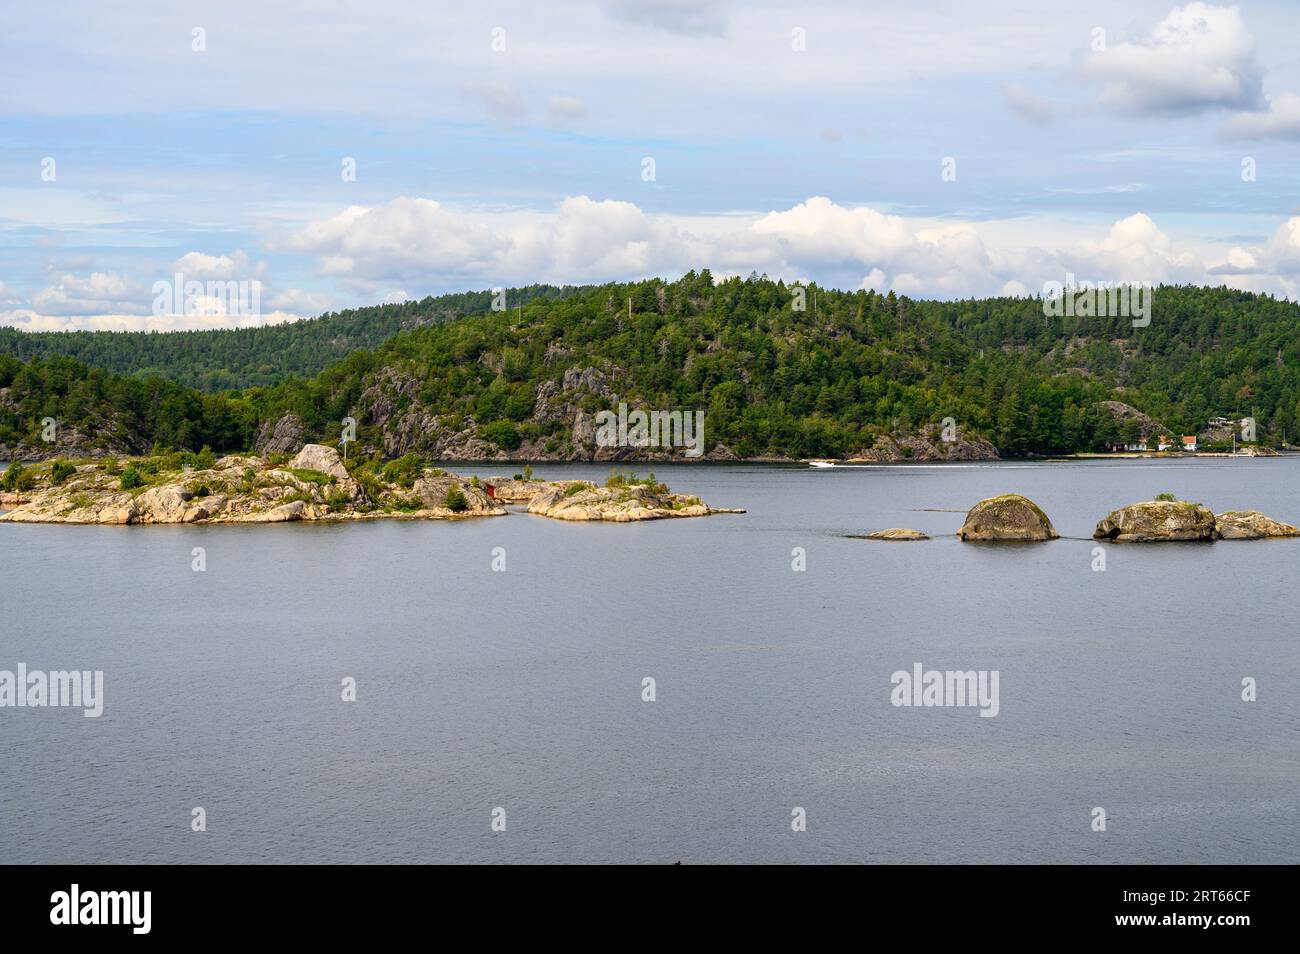 View from Buholmen island over the sea and skerries to Gumoy in the Kragero archipelago, Telemark Norway. Stock Photo